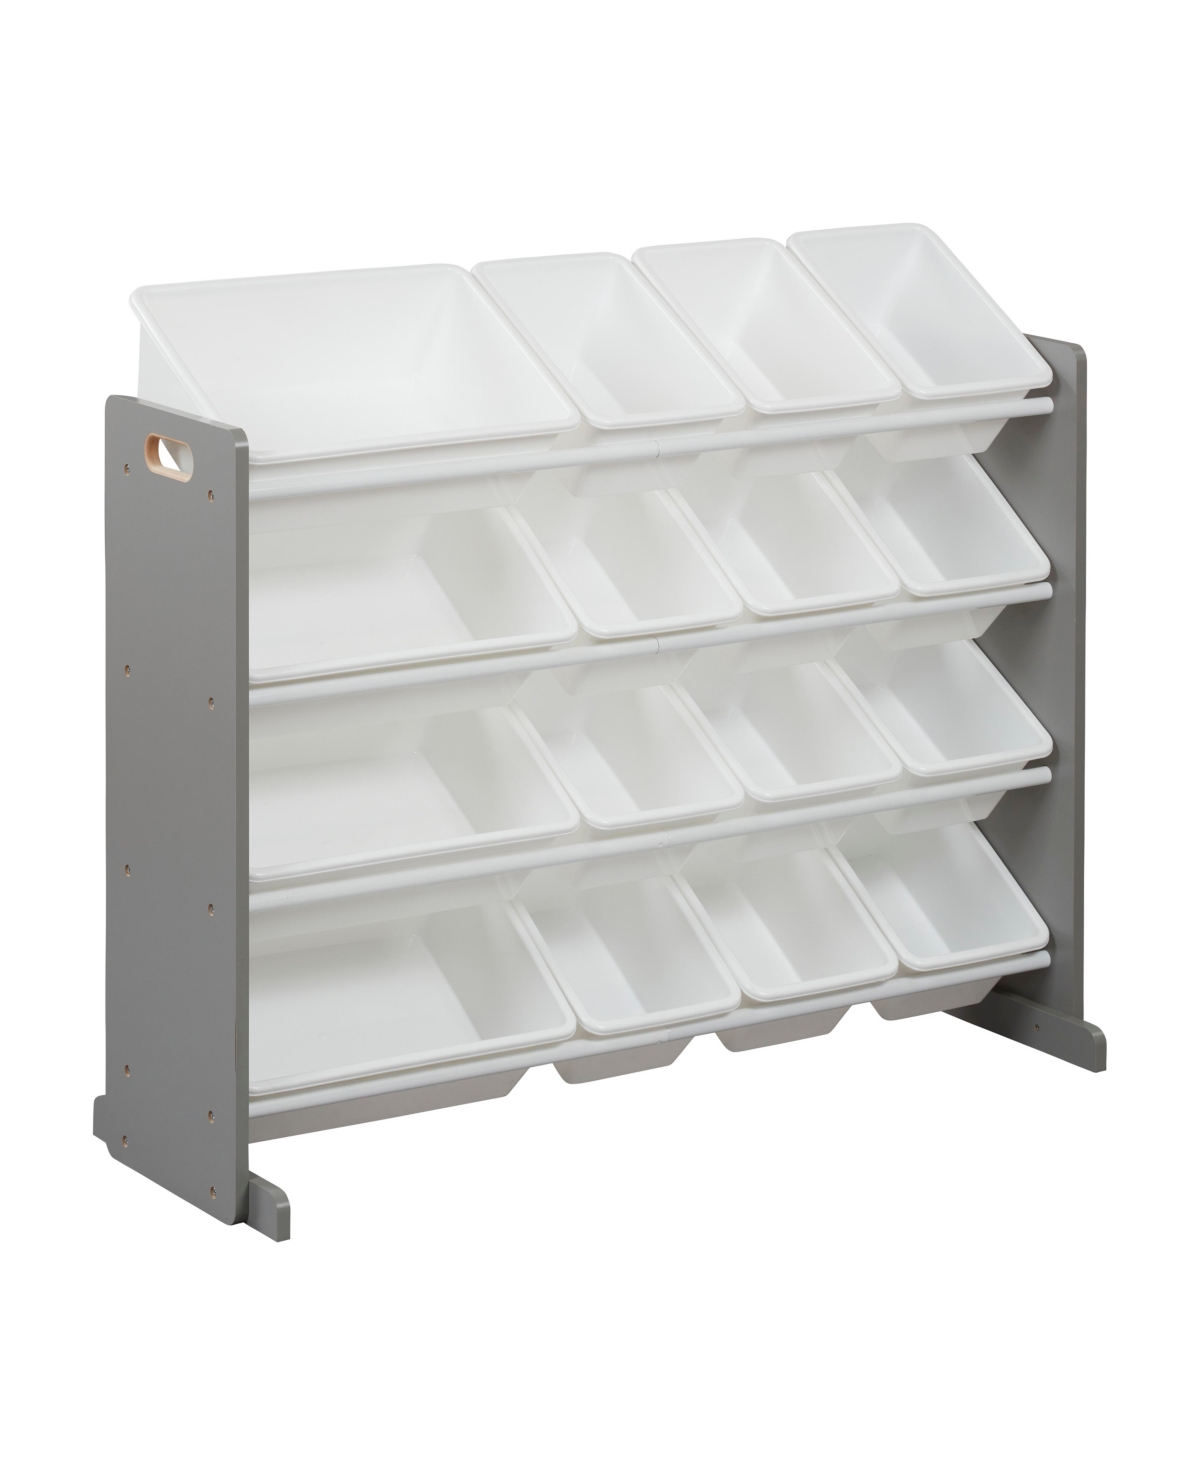 4-Tier Organizer with 16 Bins, Grey/White - Natural/primary